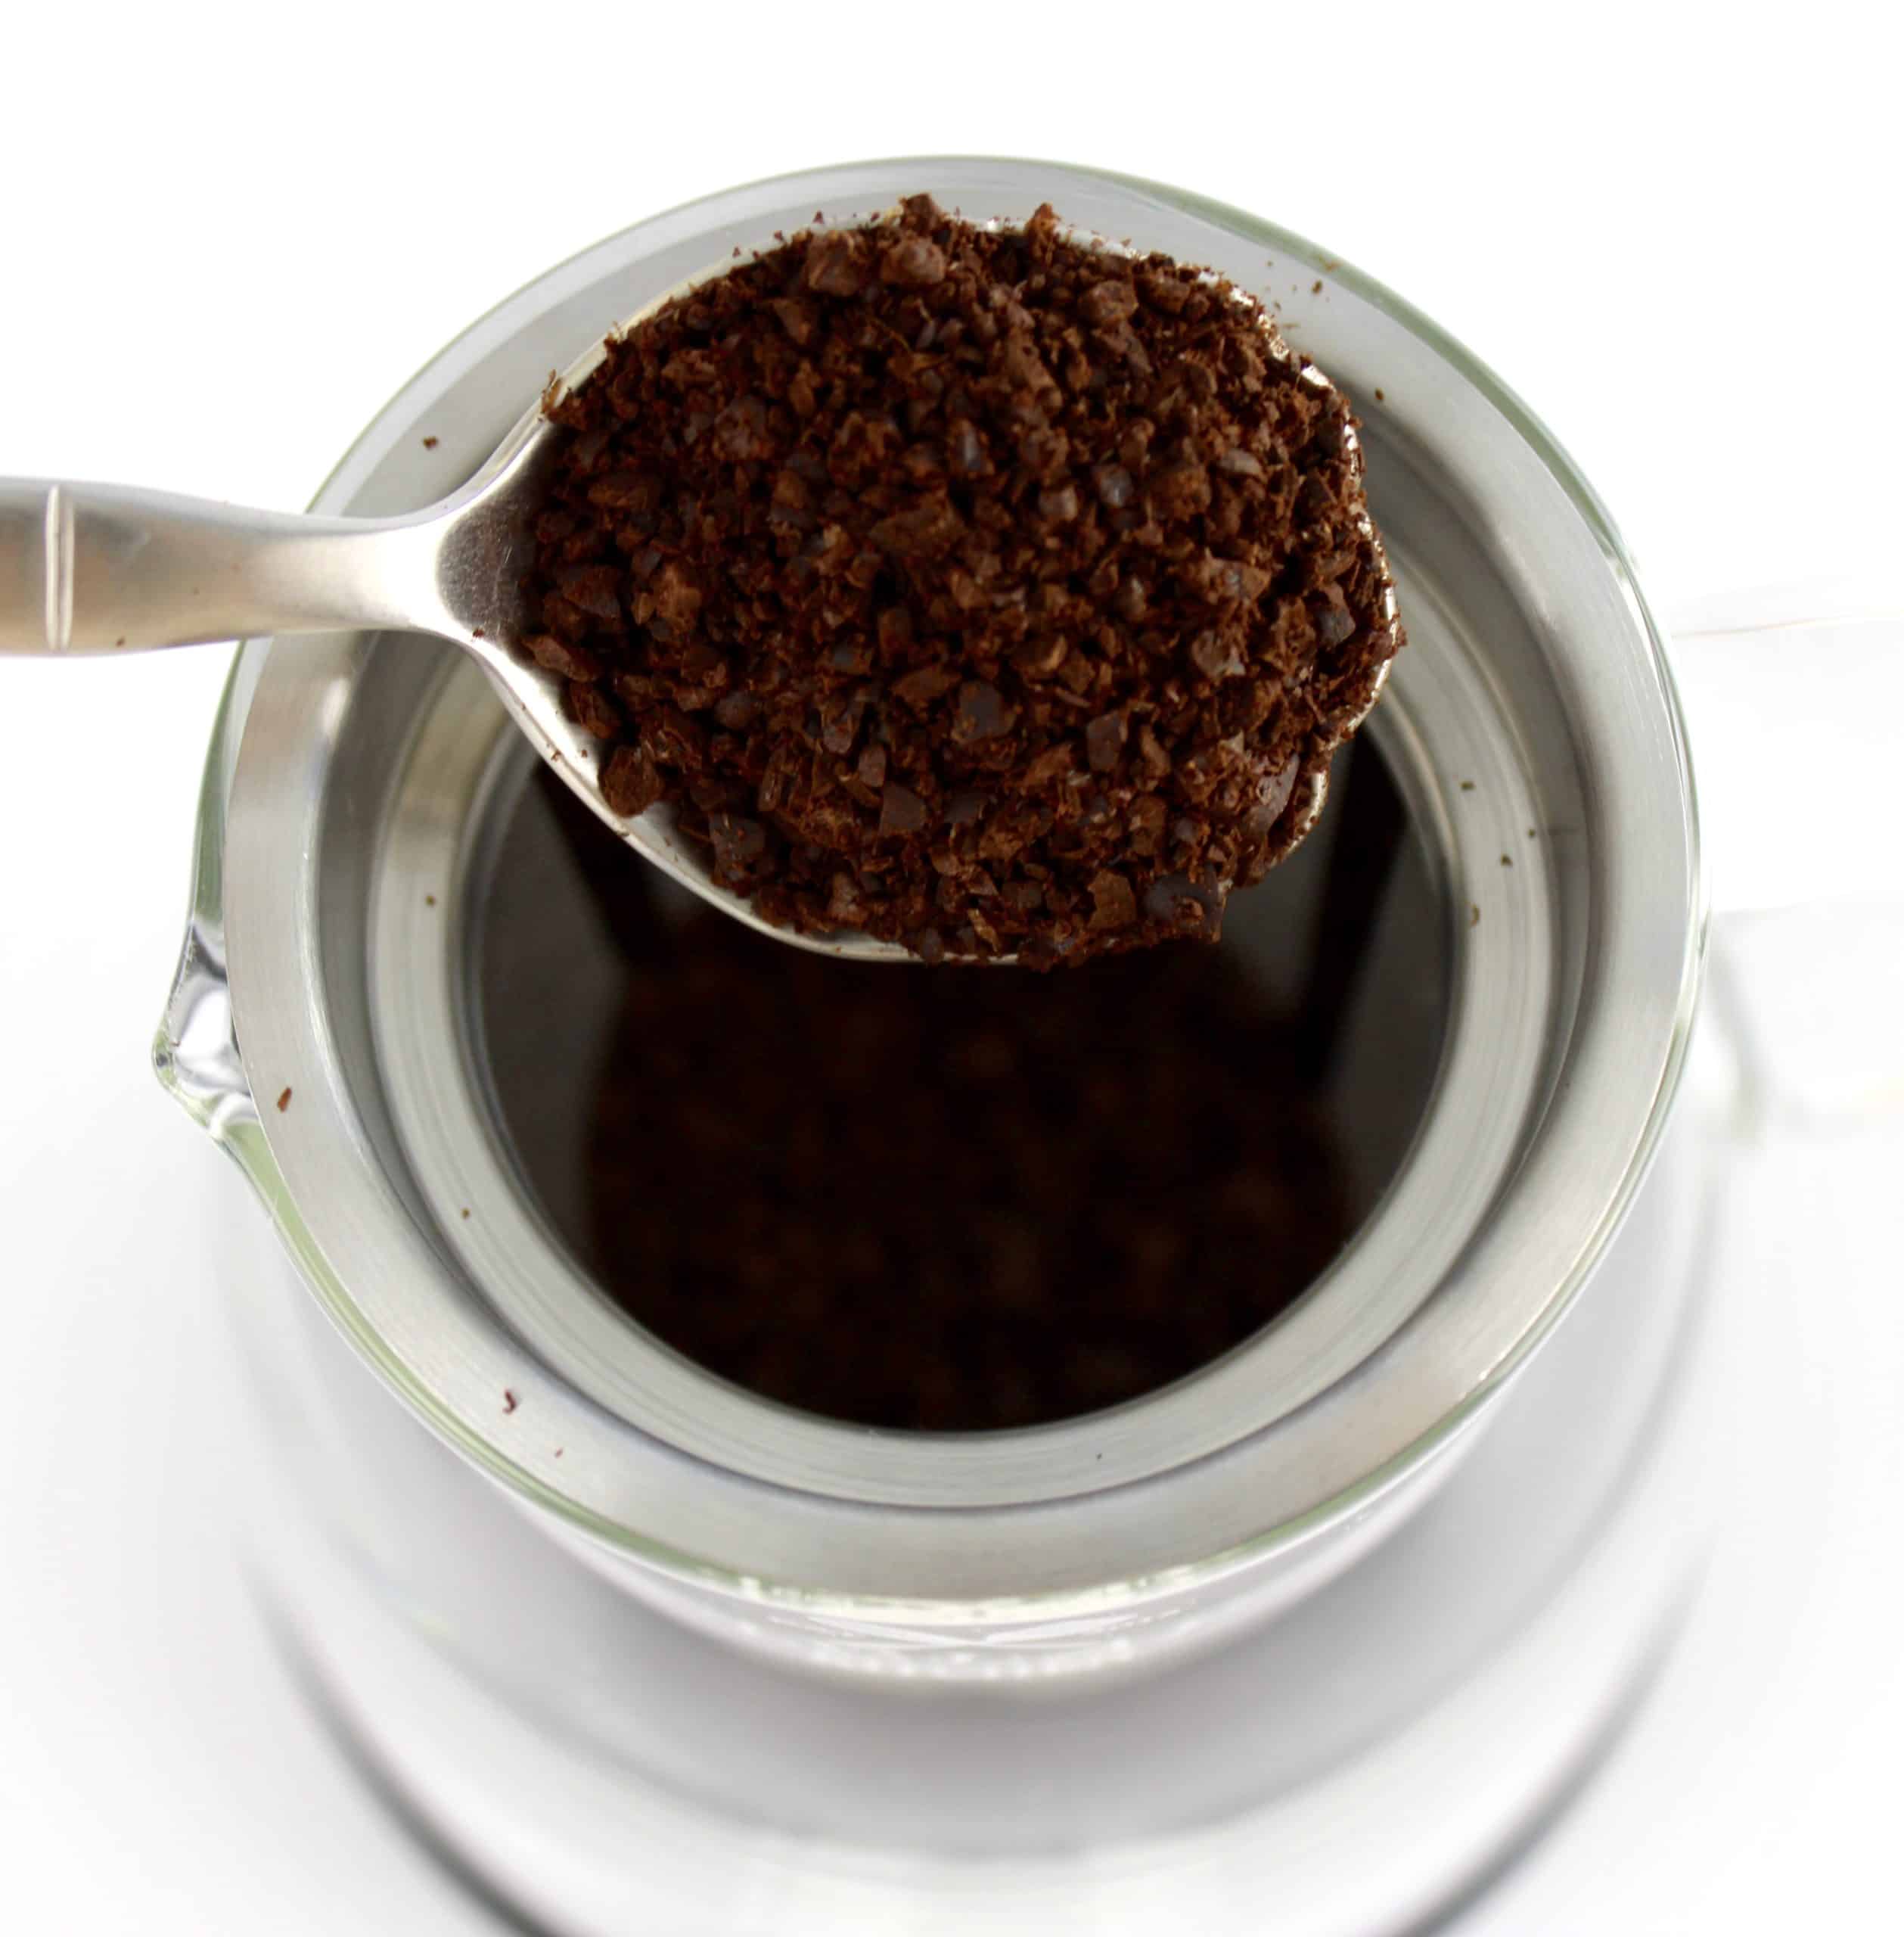 coffee grounds being spooned into coffee maker